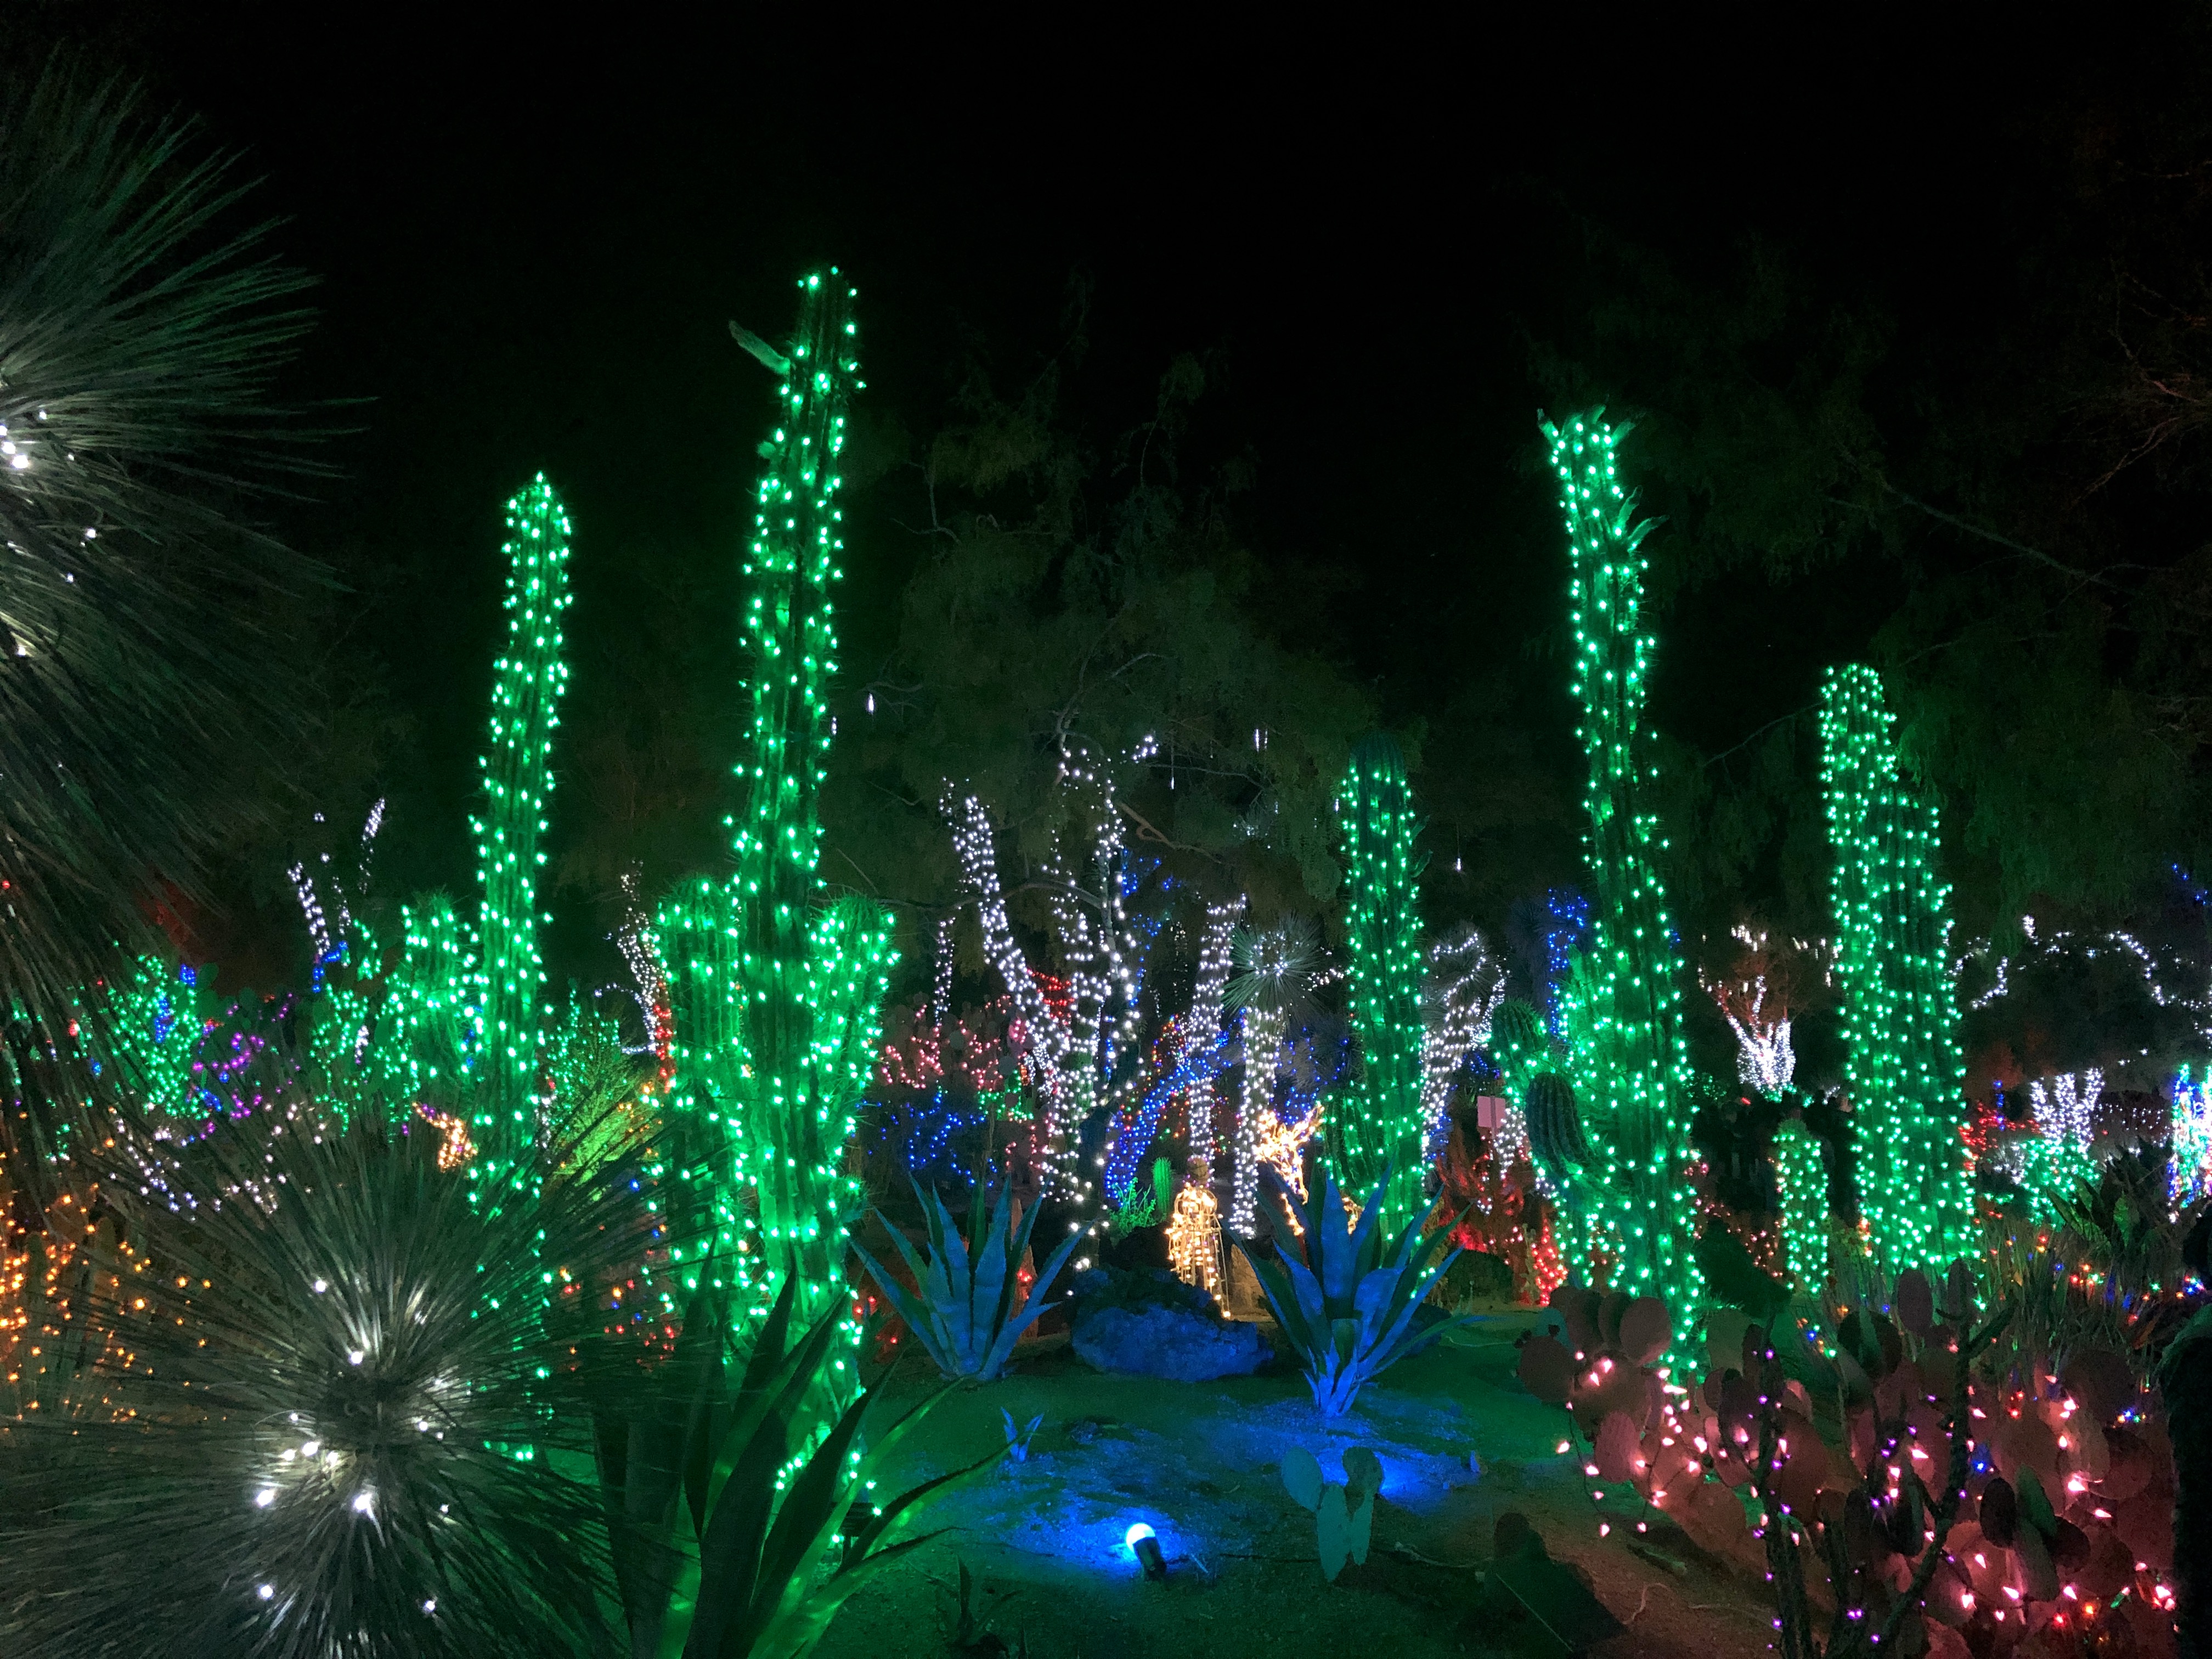 cactus with holiday lights at night